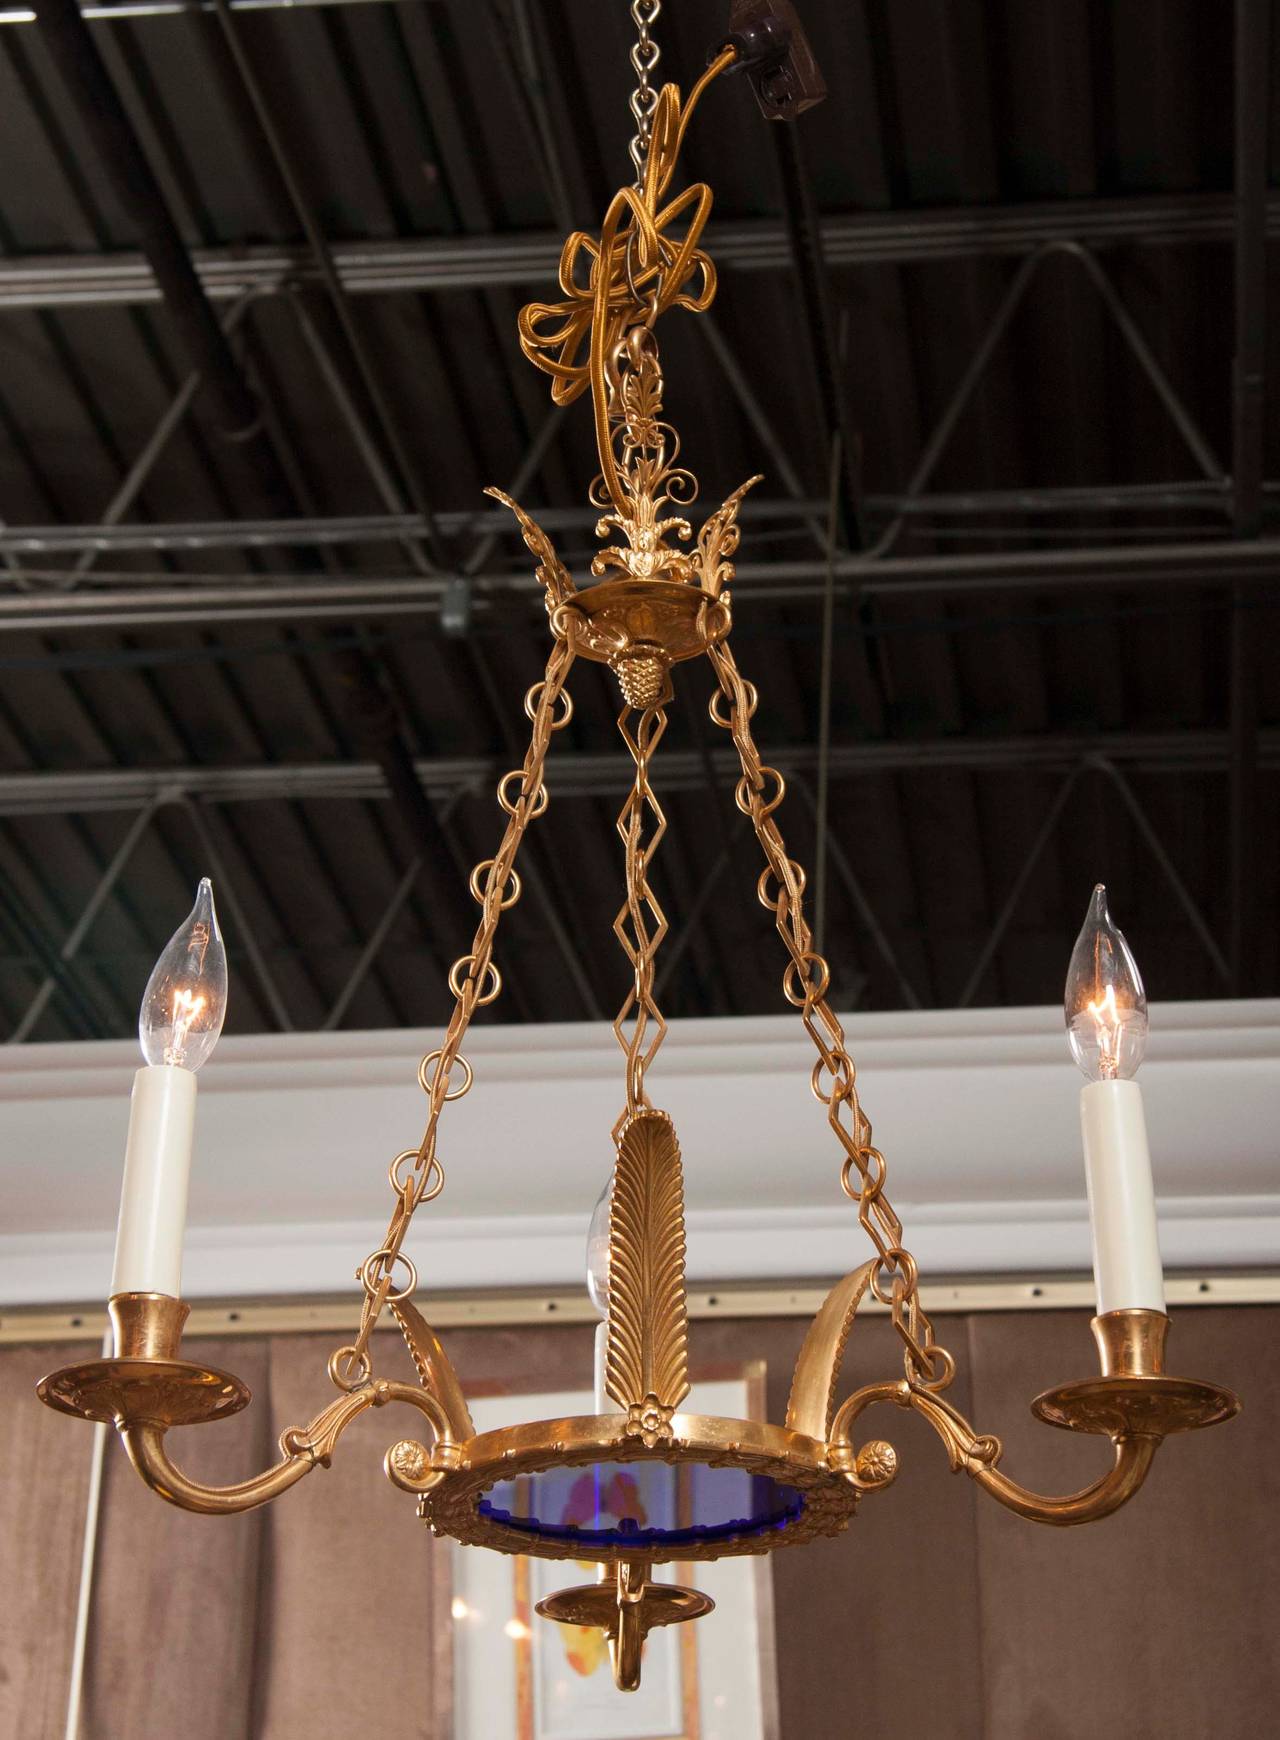 A doré bronze and cobalt chandelier with a three-feather, circular design in the Russian or Directoire style.